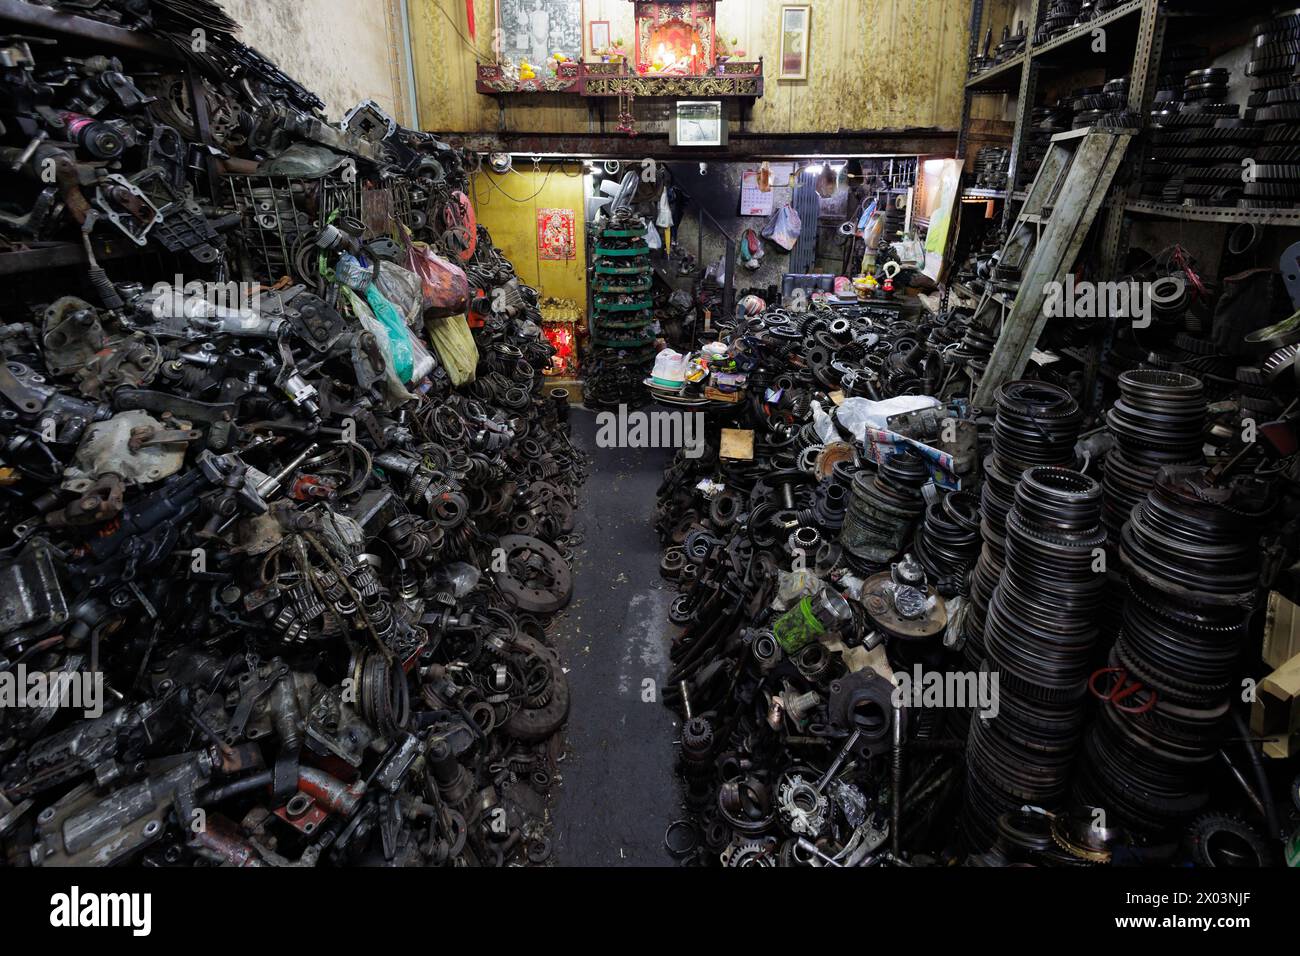 A vehicle shop filled with old parts and tools, the atmosphere is chaotic and disorganized, Bangkok's Chinatown, Thailand Stock Photo